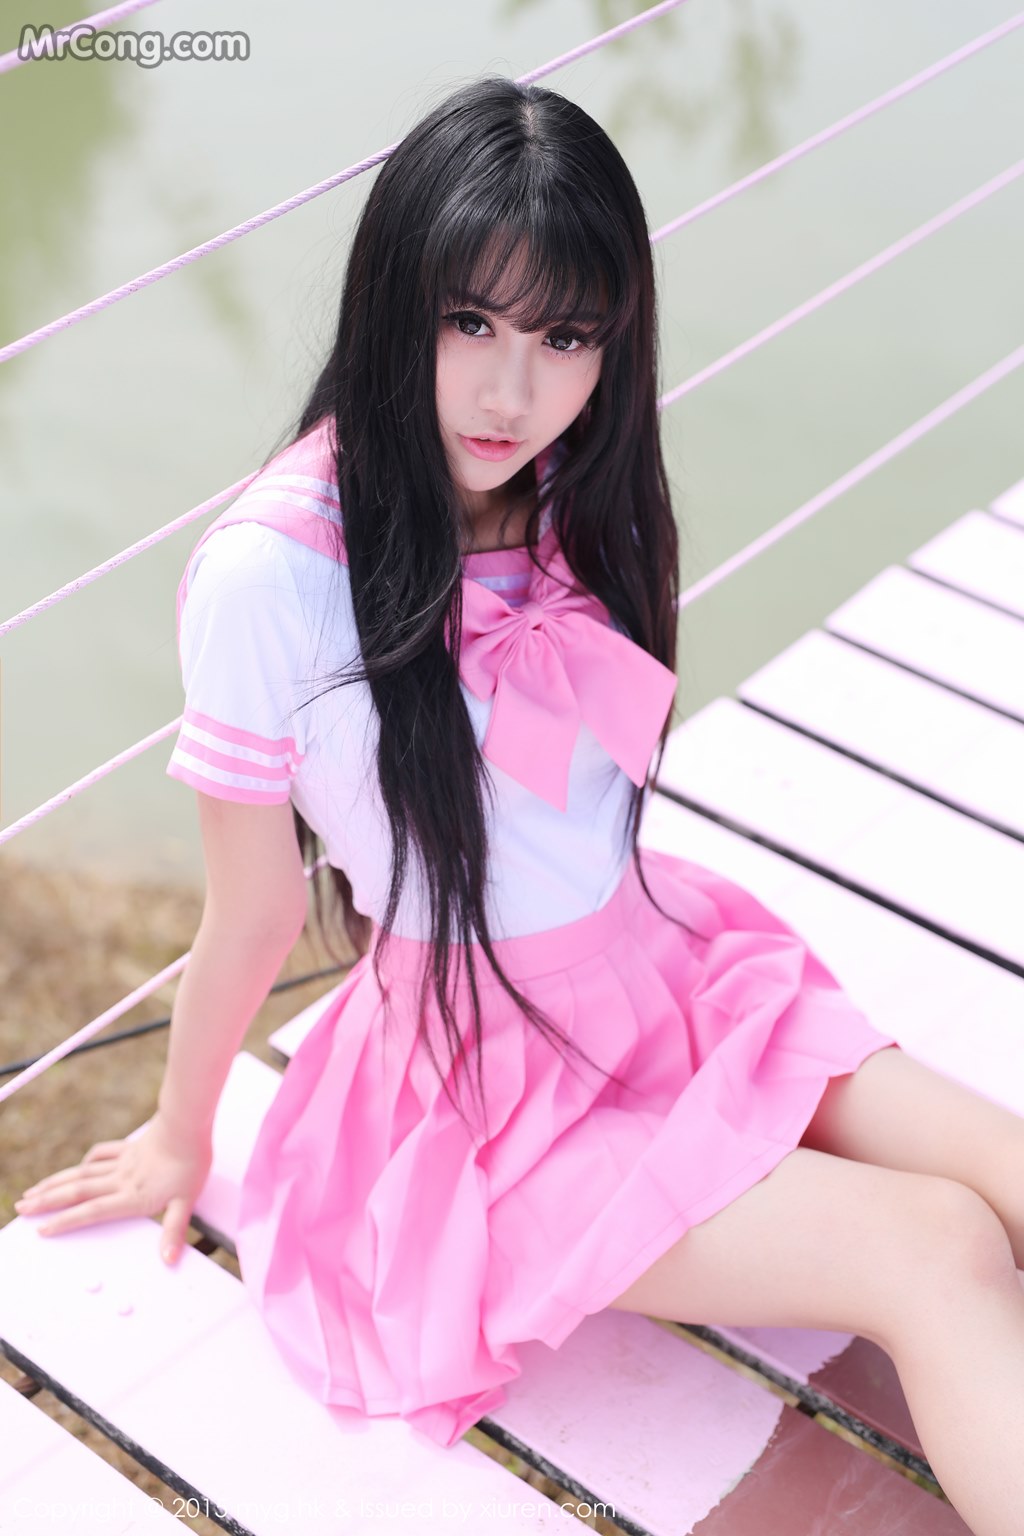 MyGirl Vol. 099: Model Yang Xiao Qing Er (杨晓青 儿) (62 pictures) photo 1-19